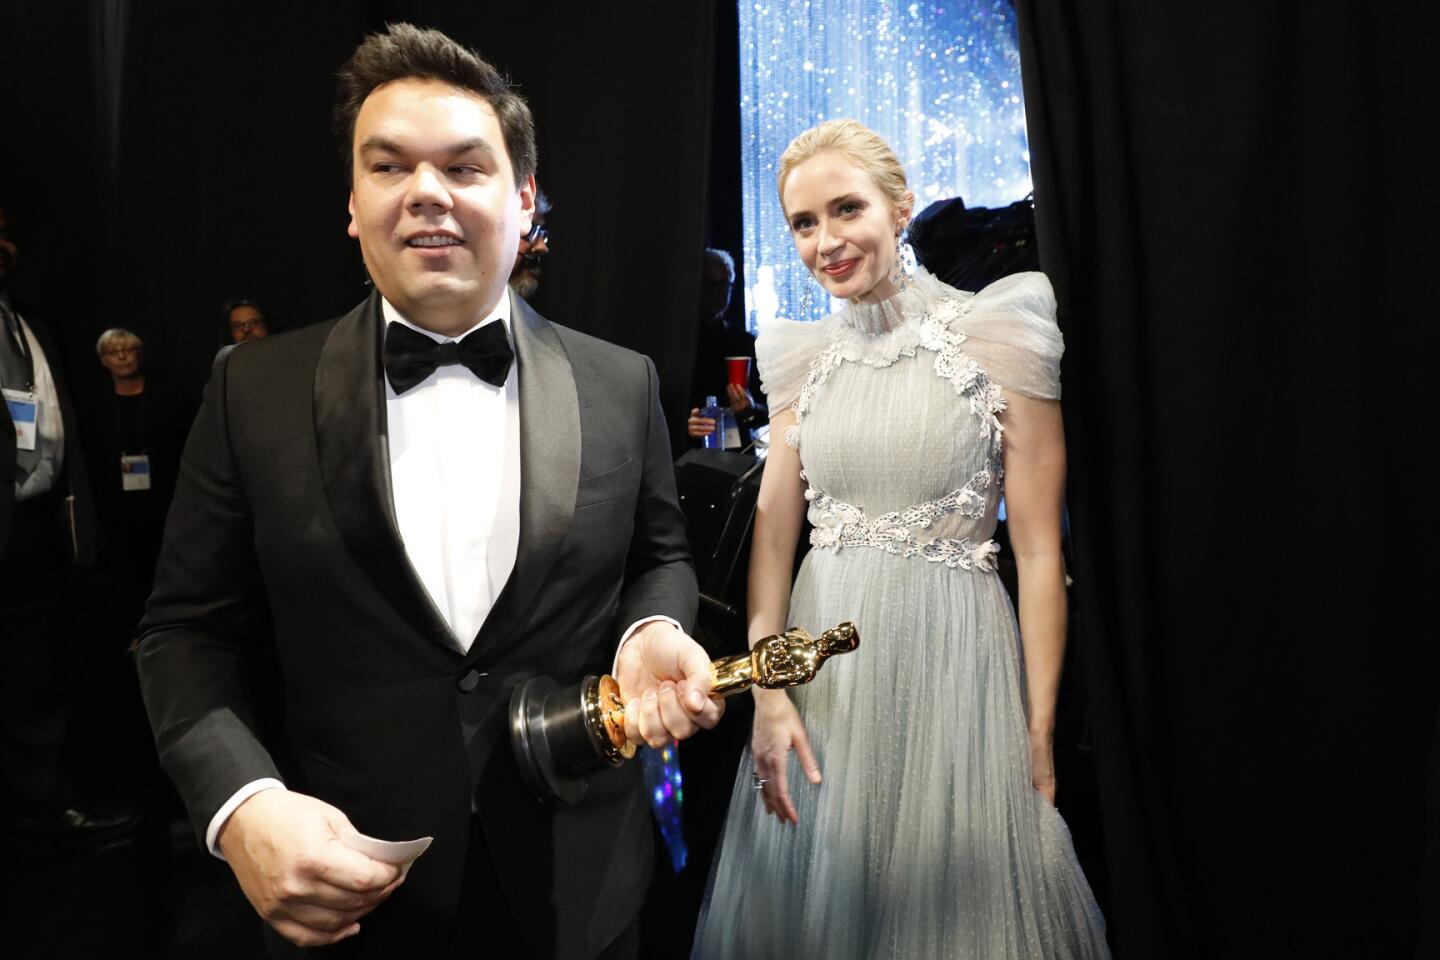 Robert Lopez and Emily Blunt backstage at the 90th Academy Awards on Sunday at the Dolby Theatre in Hollywood.